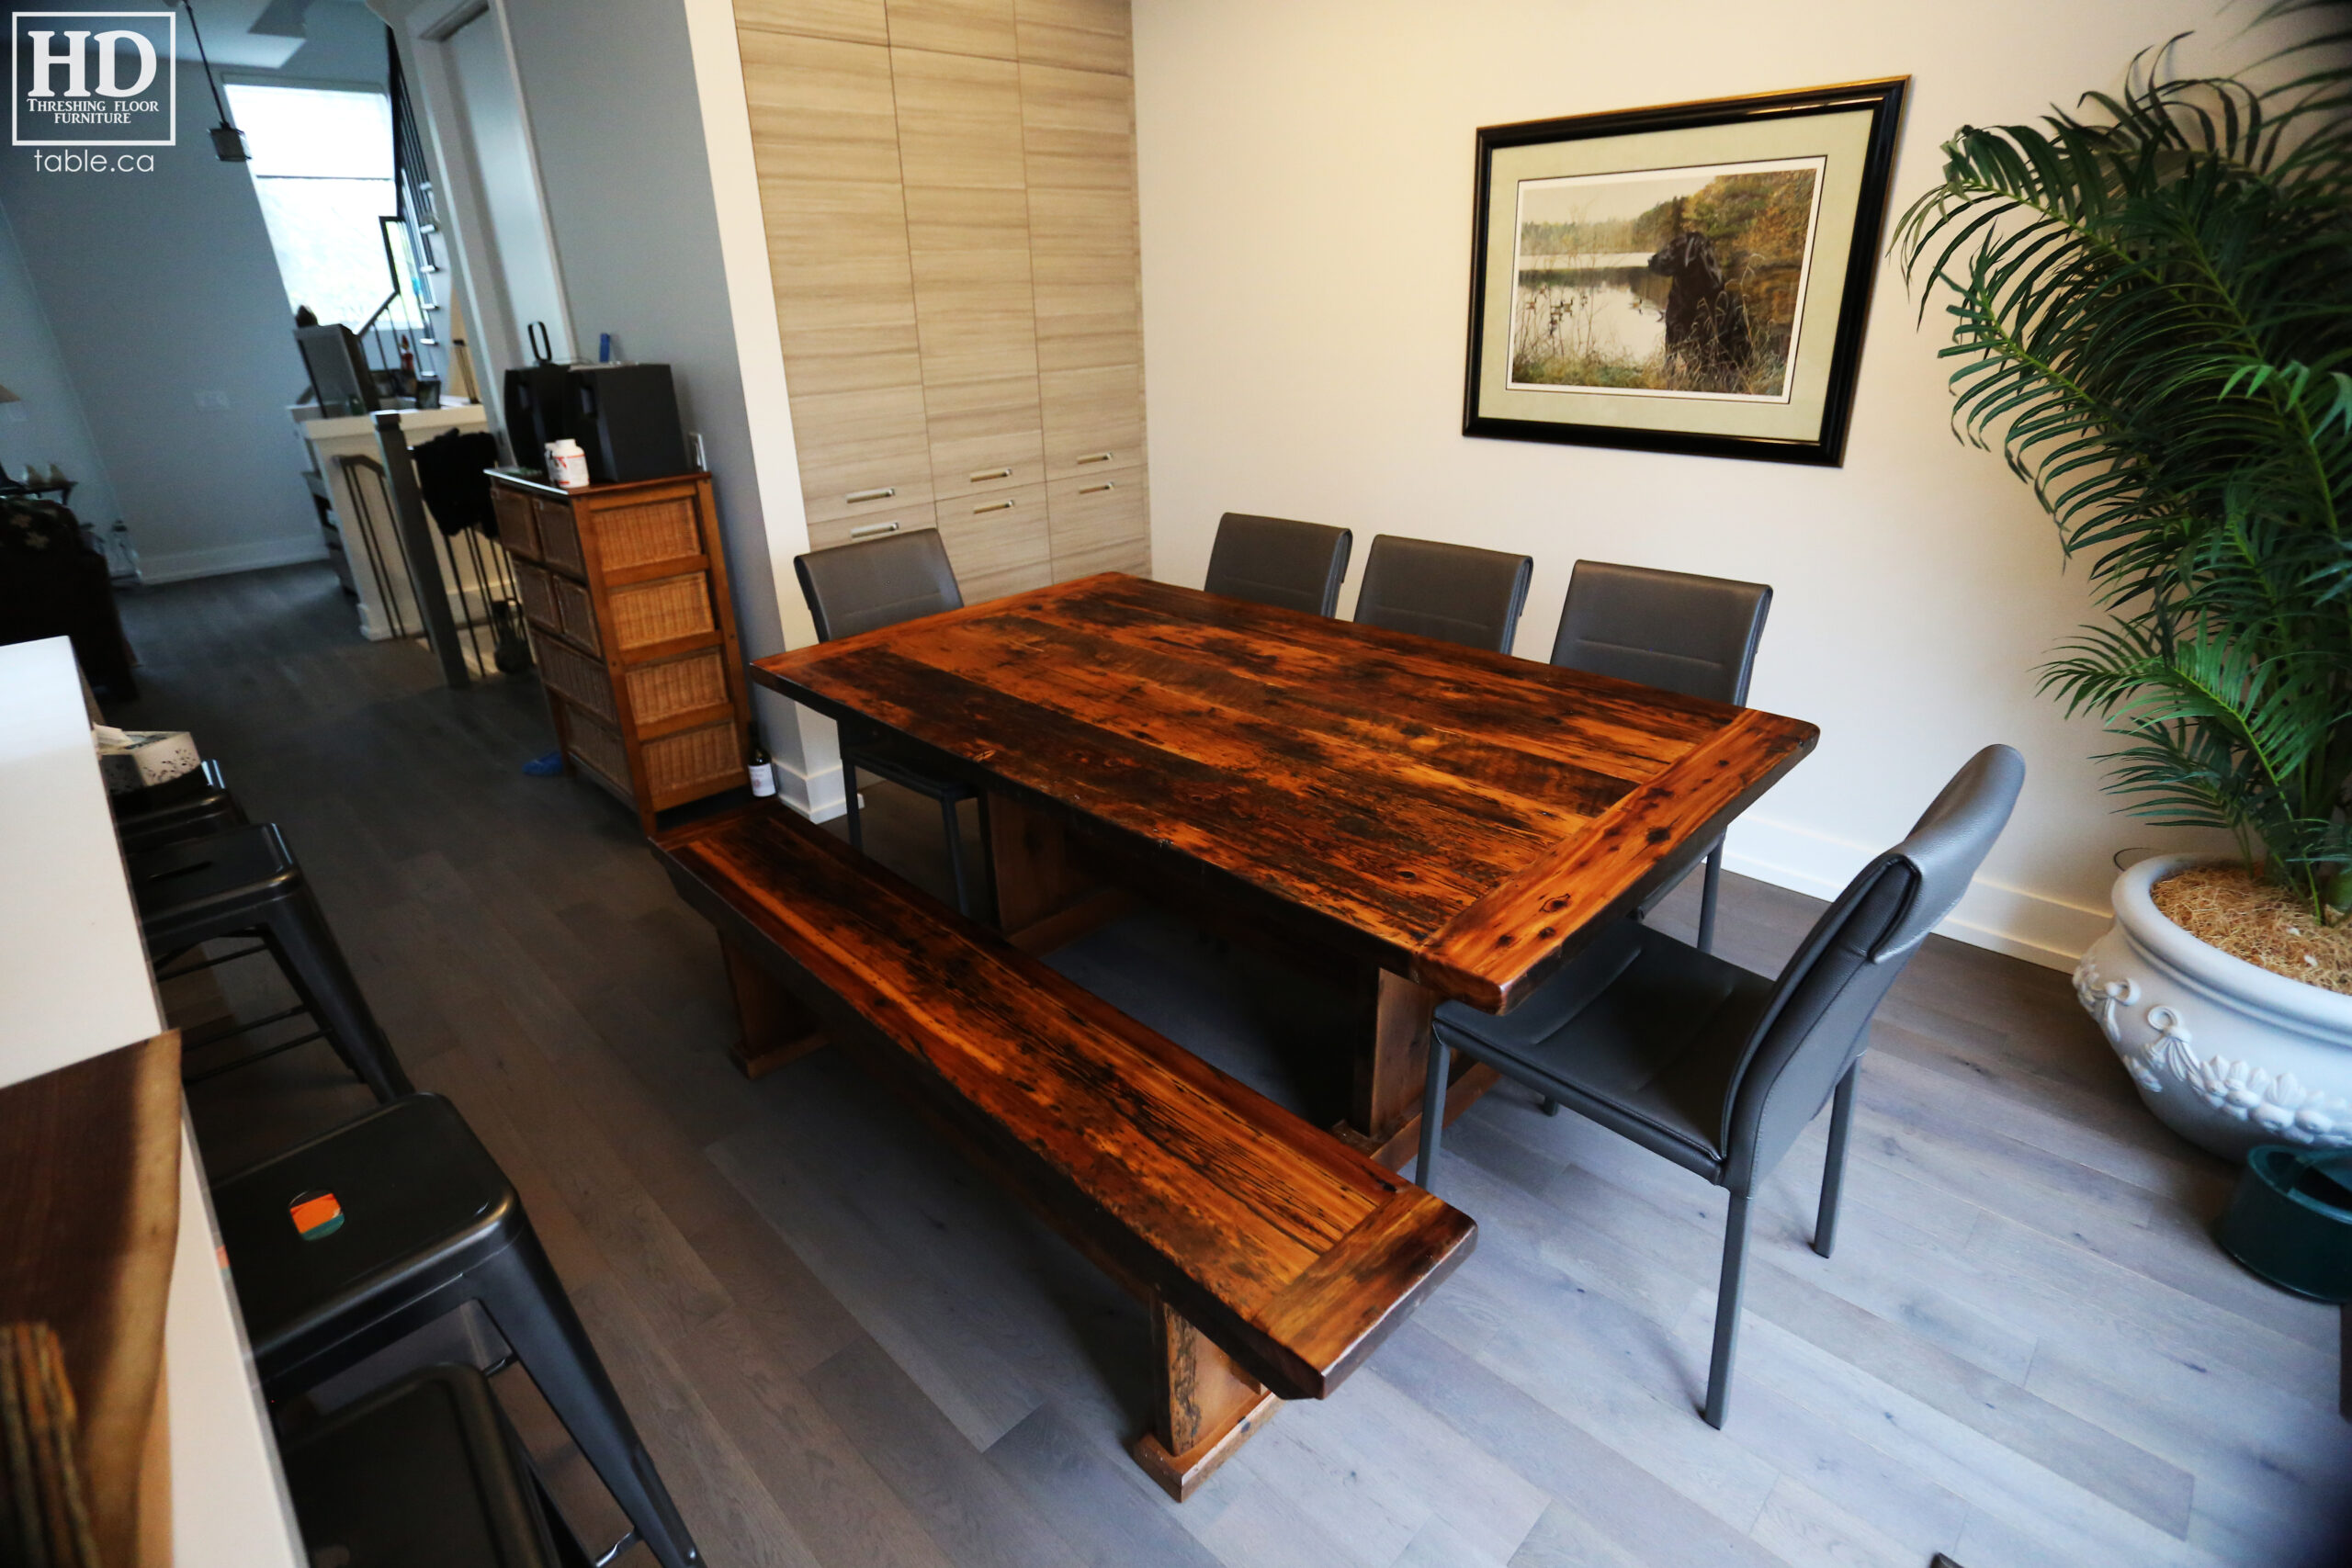 Rustic Table with Light Epoxy Coating Option by HD Threshing Floor Furniture / www.table.ca